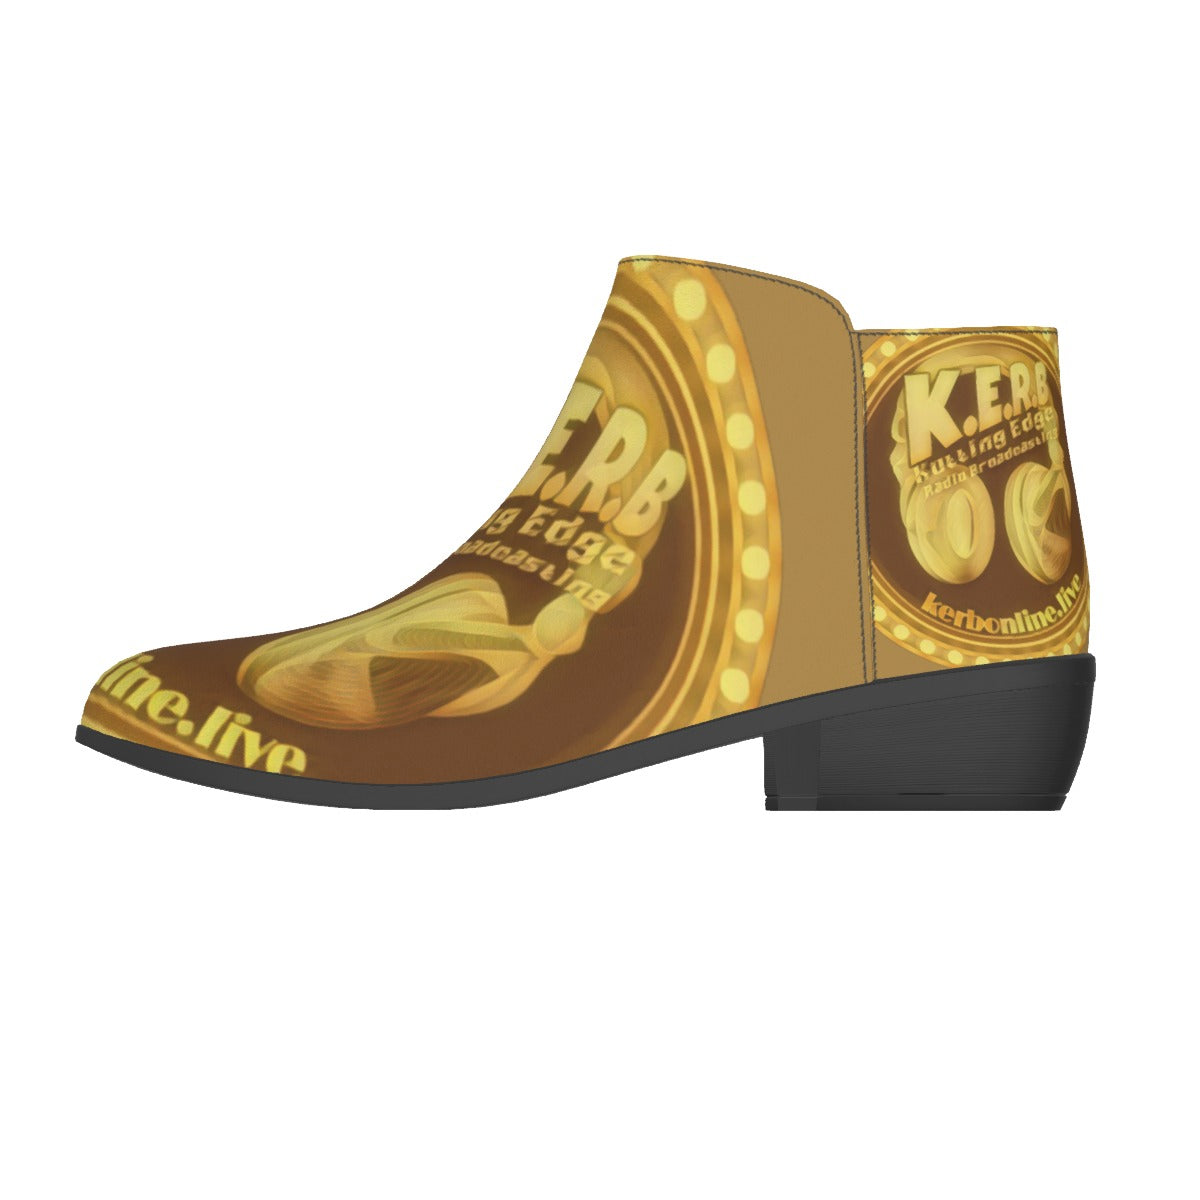 KERB Gold Rush Logo Women's Western Ankle Boots